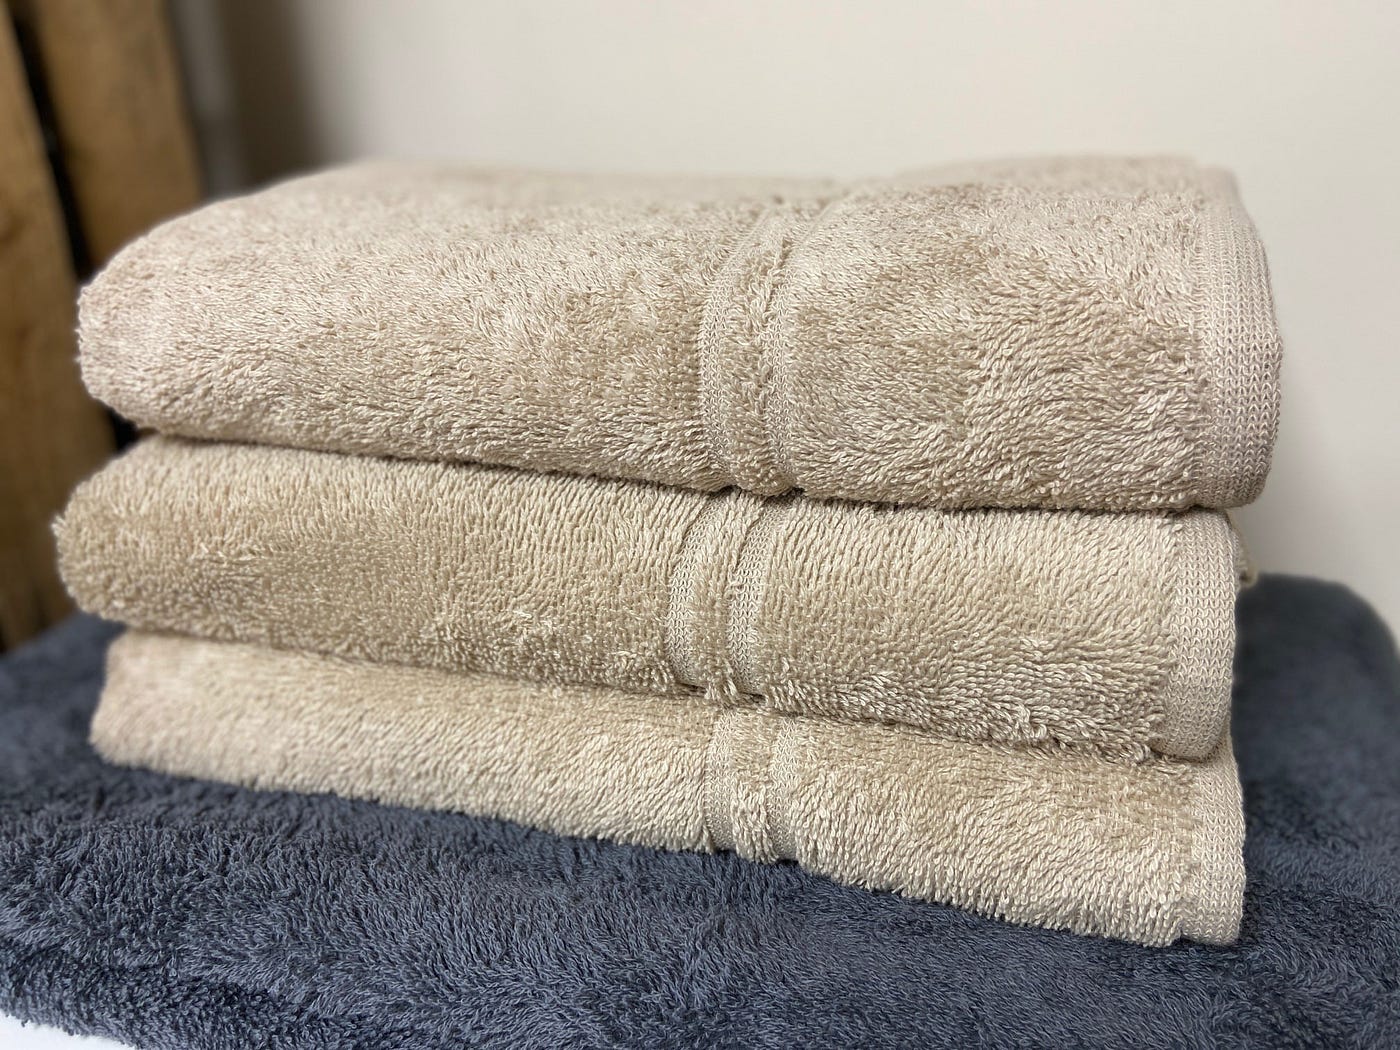 Elevate Your Bathing Experience with Luxurious Bath Towels